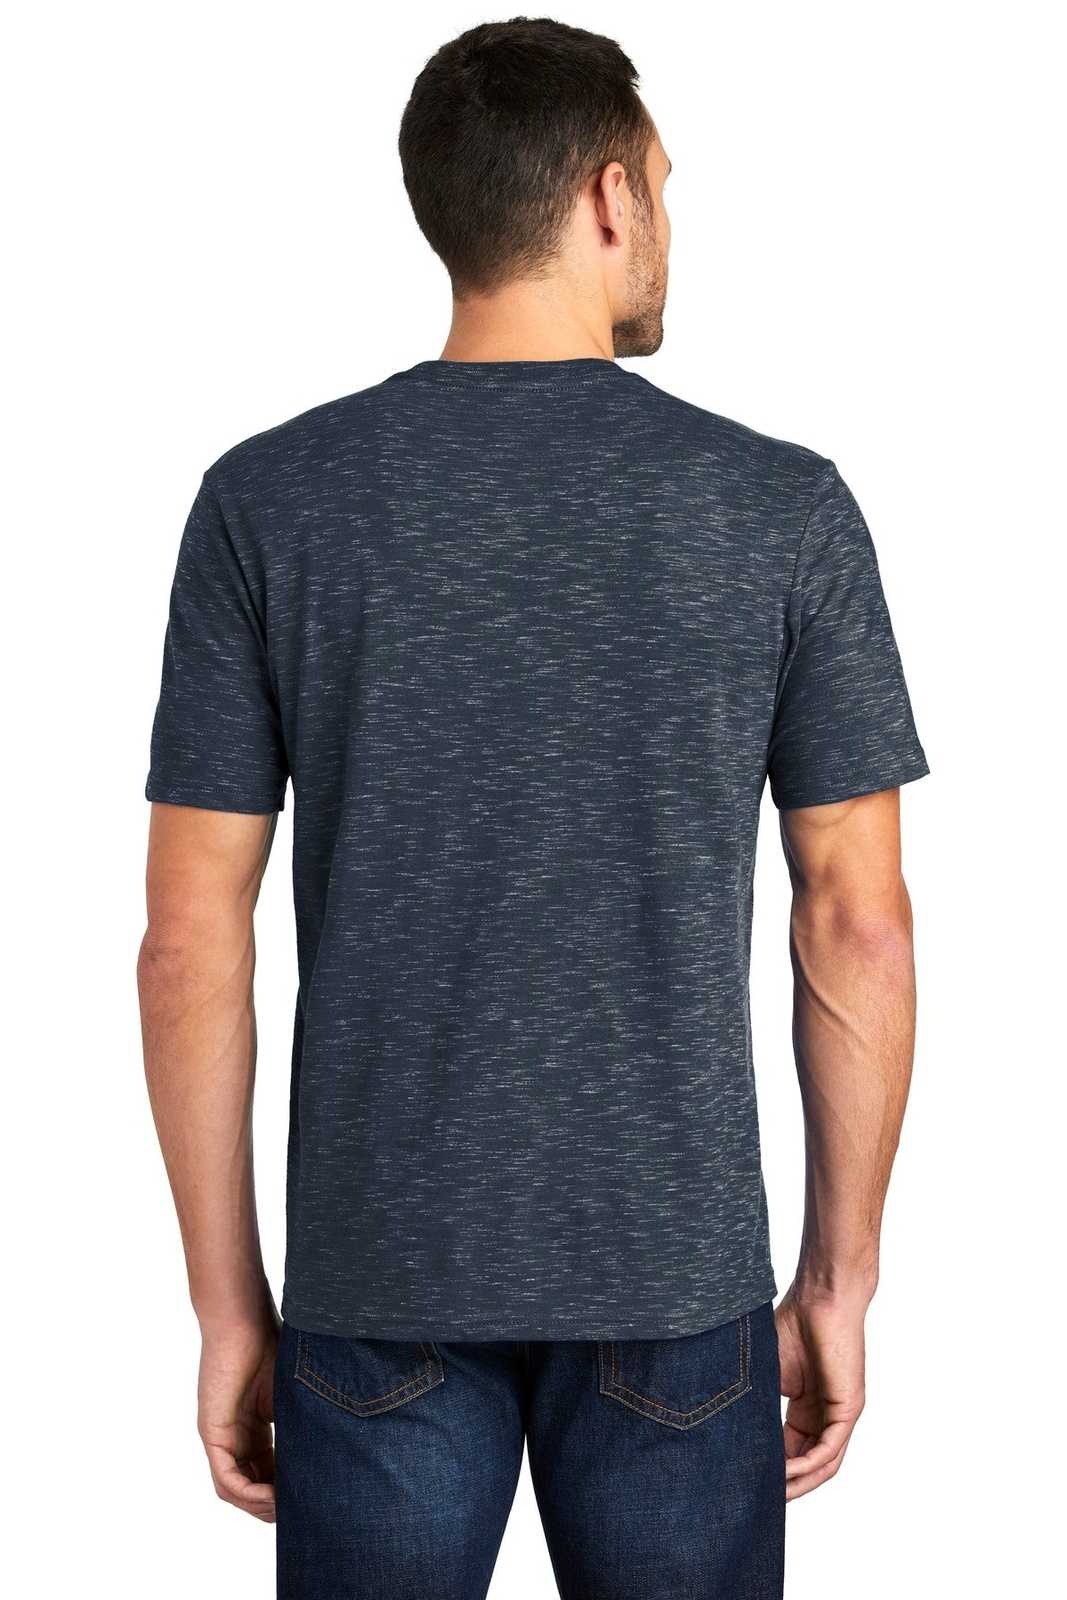 District DT564 Medal Tee - New Navy - HIT a Double - 1